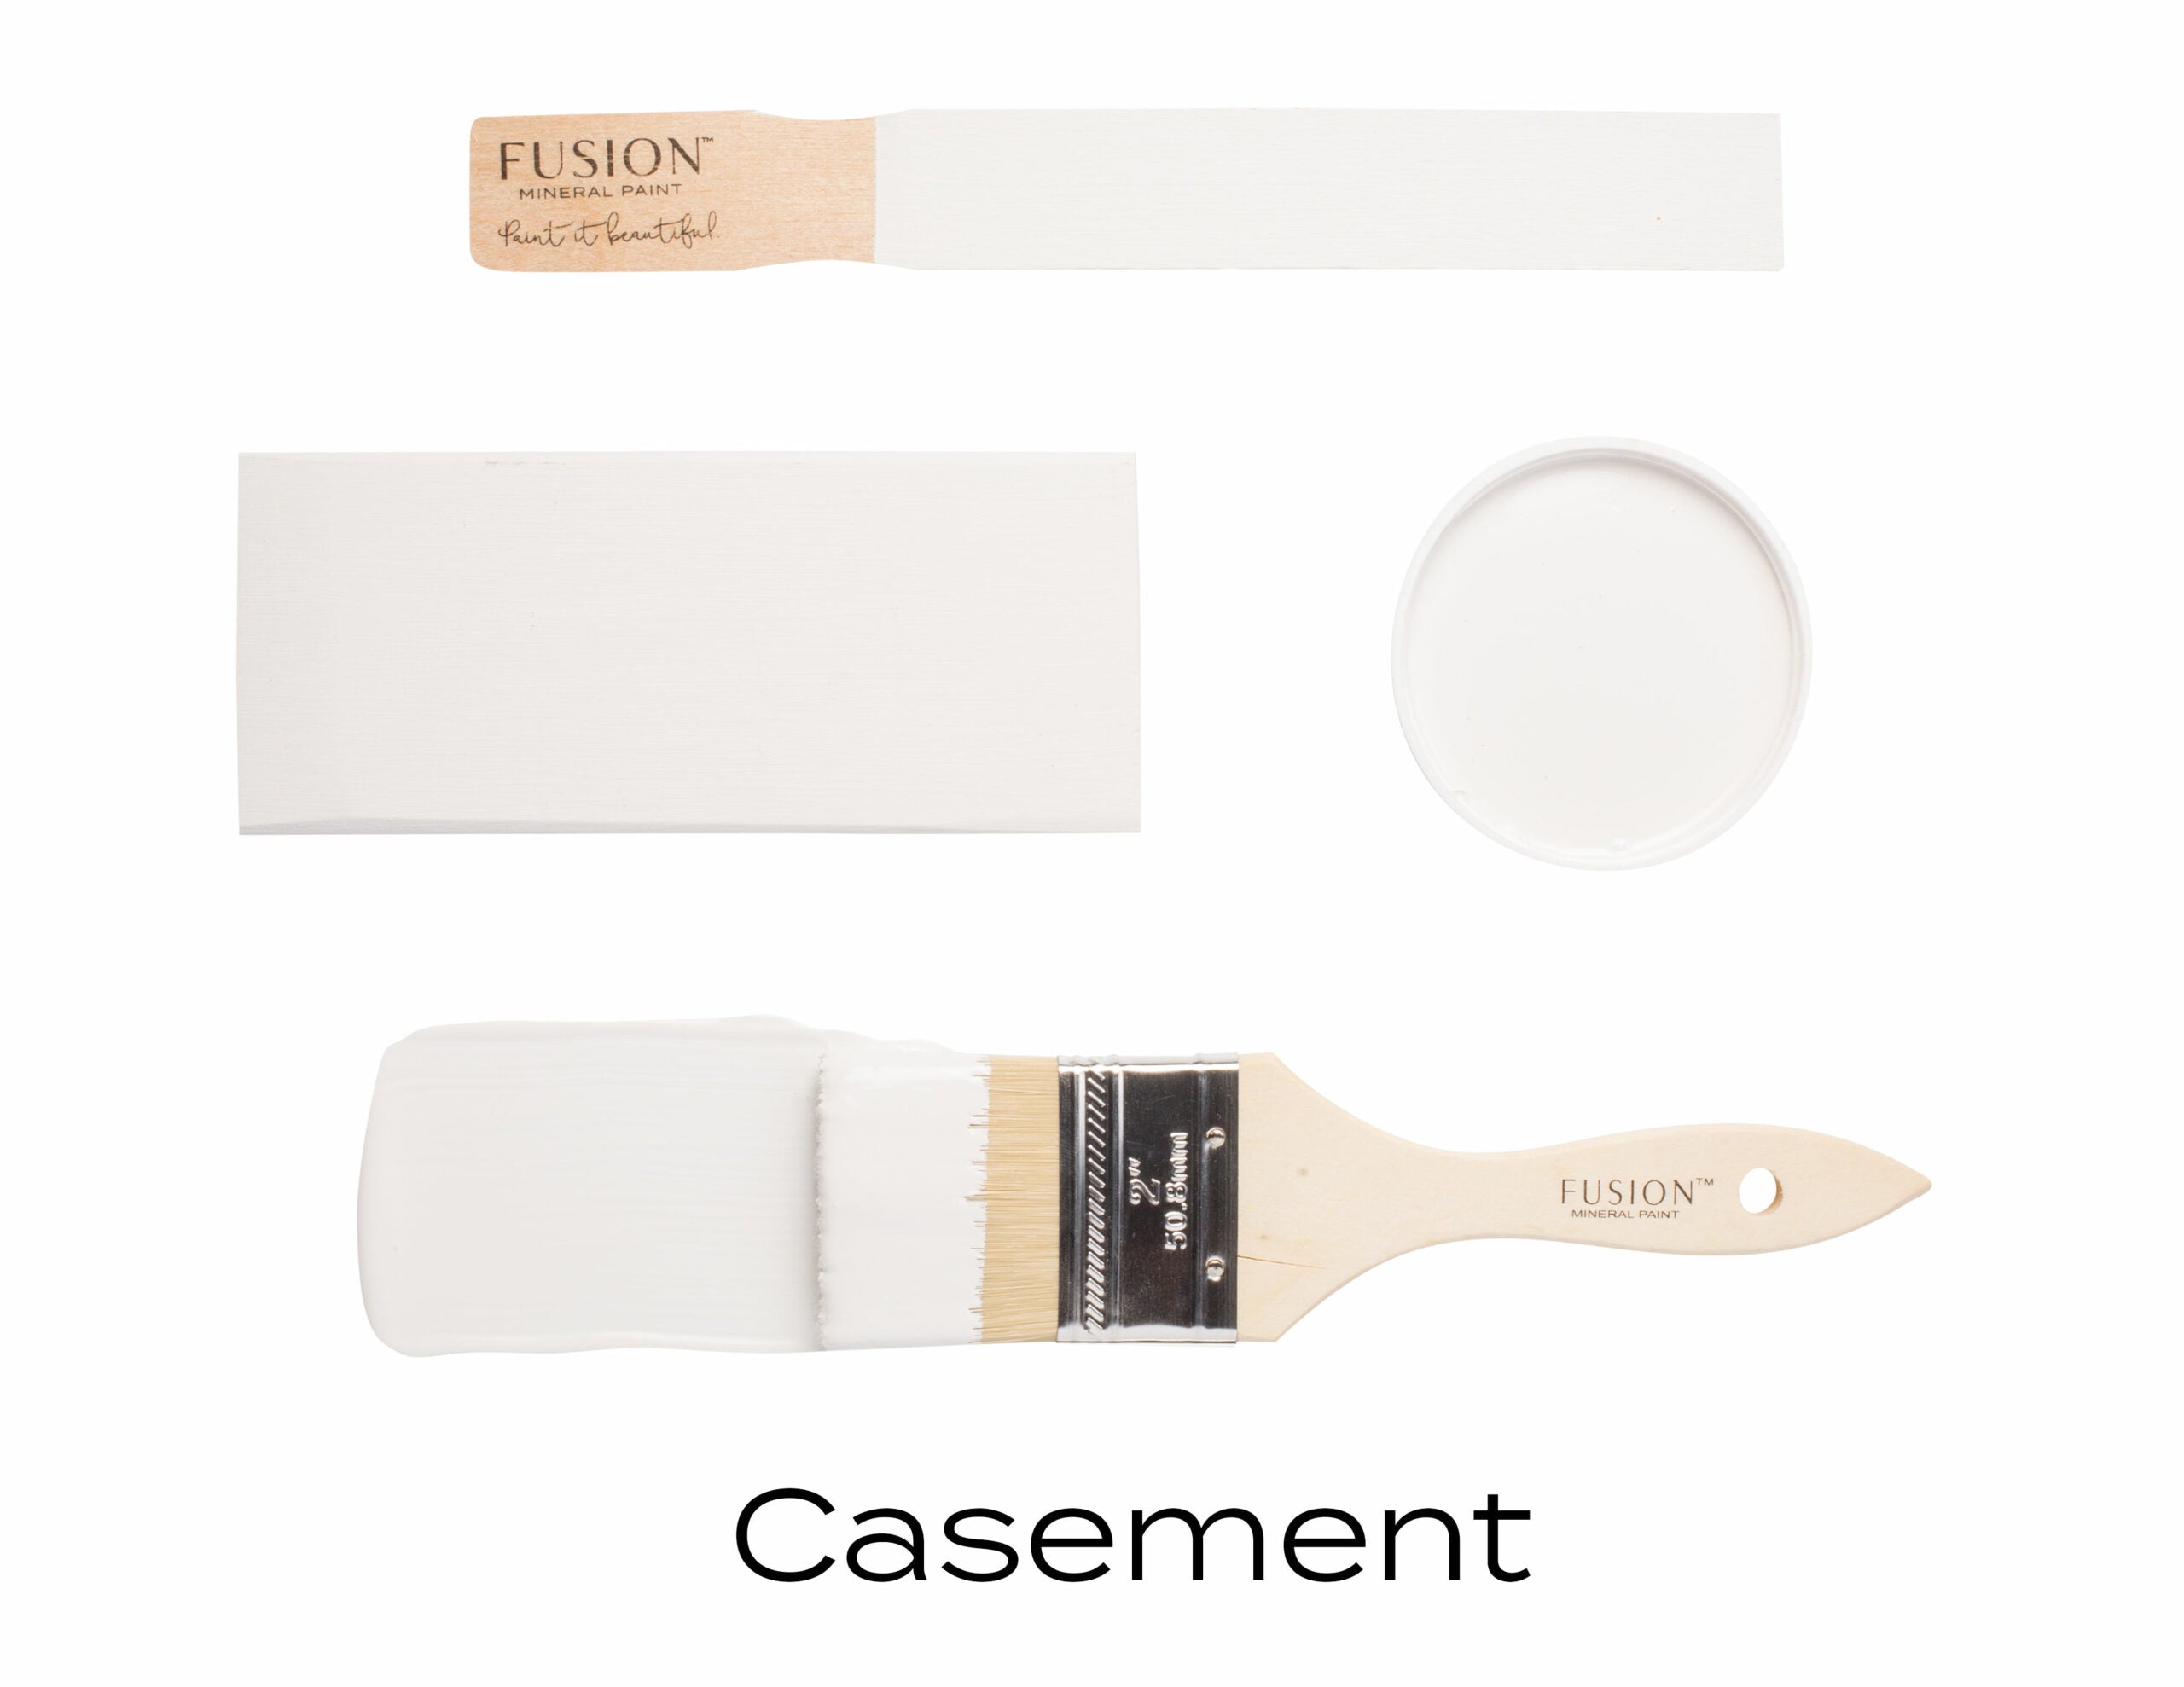 Fusion Mineral Paint Casement overlay